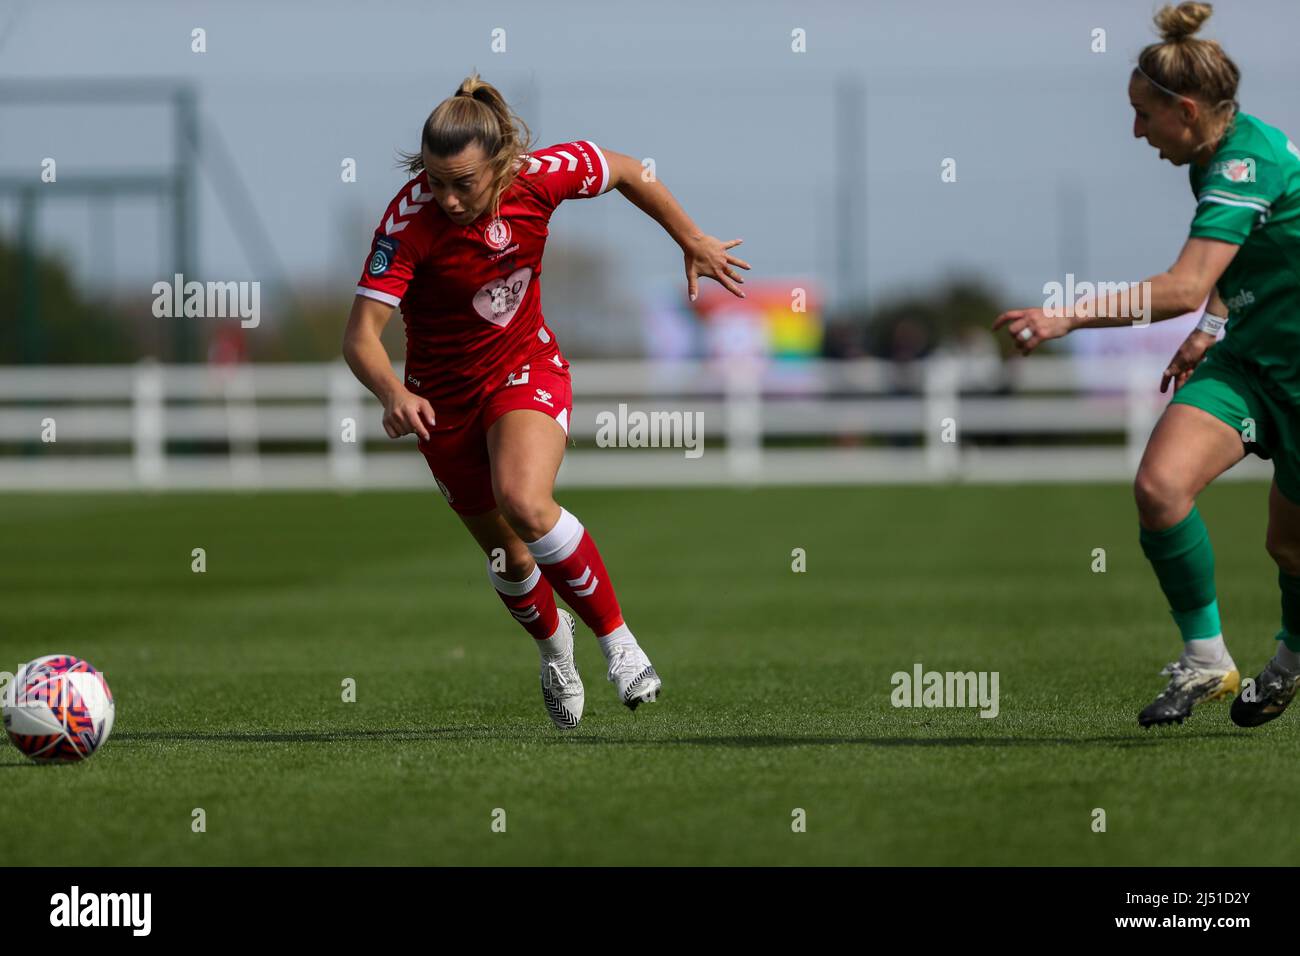 17th April 2022. Ella Powell (Bristol City) Women’s Championship game between Bristol City and Coventry United at Robins High Performance Centre. Stock Photo